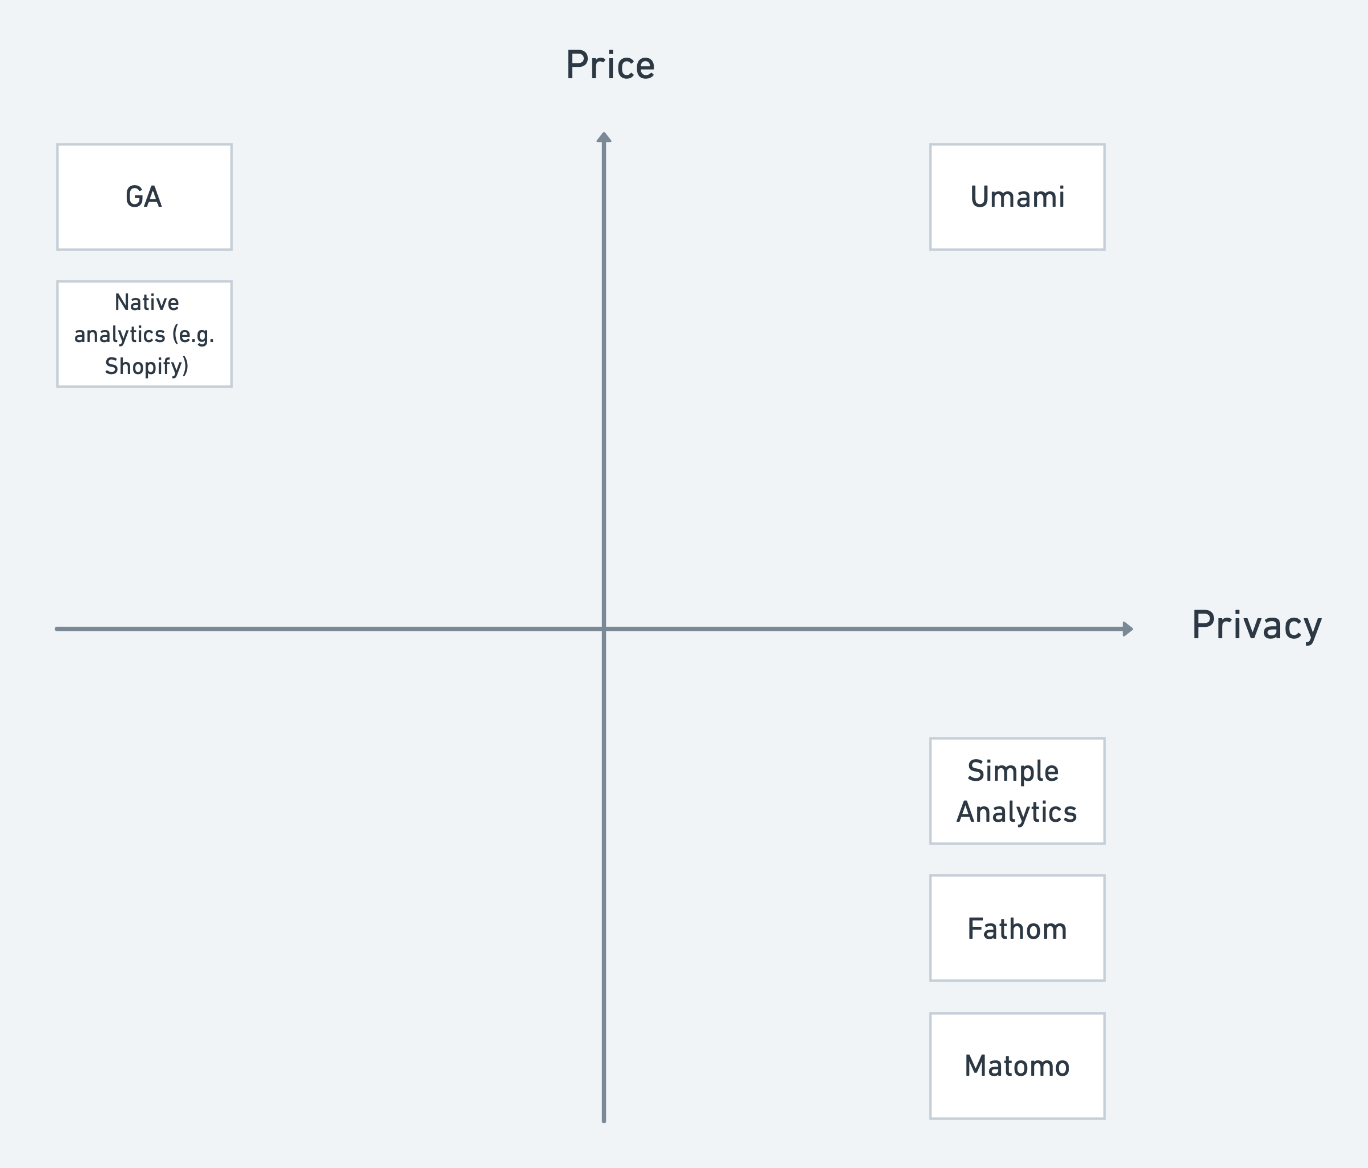 Two-dimensional market: Privacy and Price